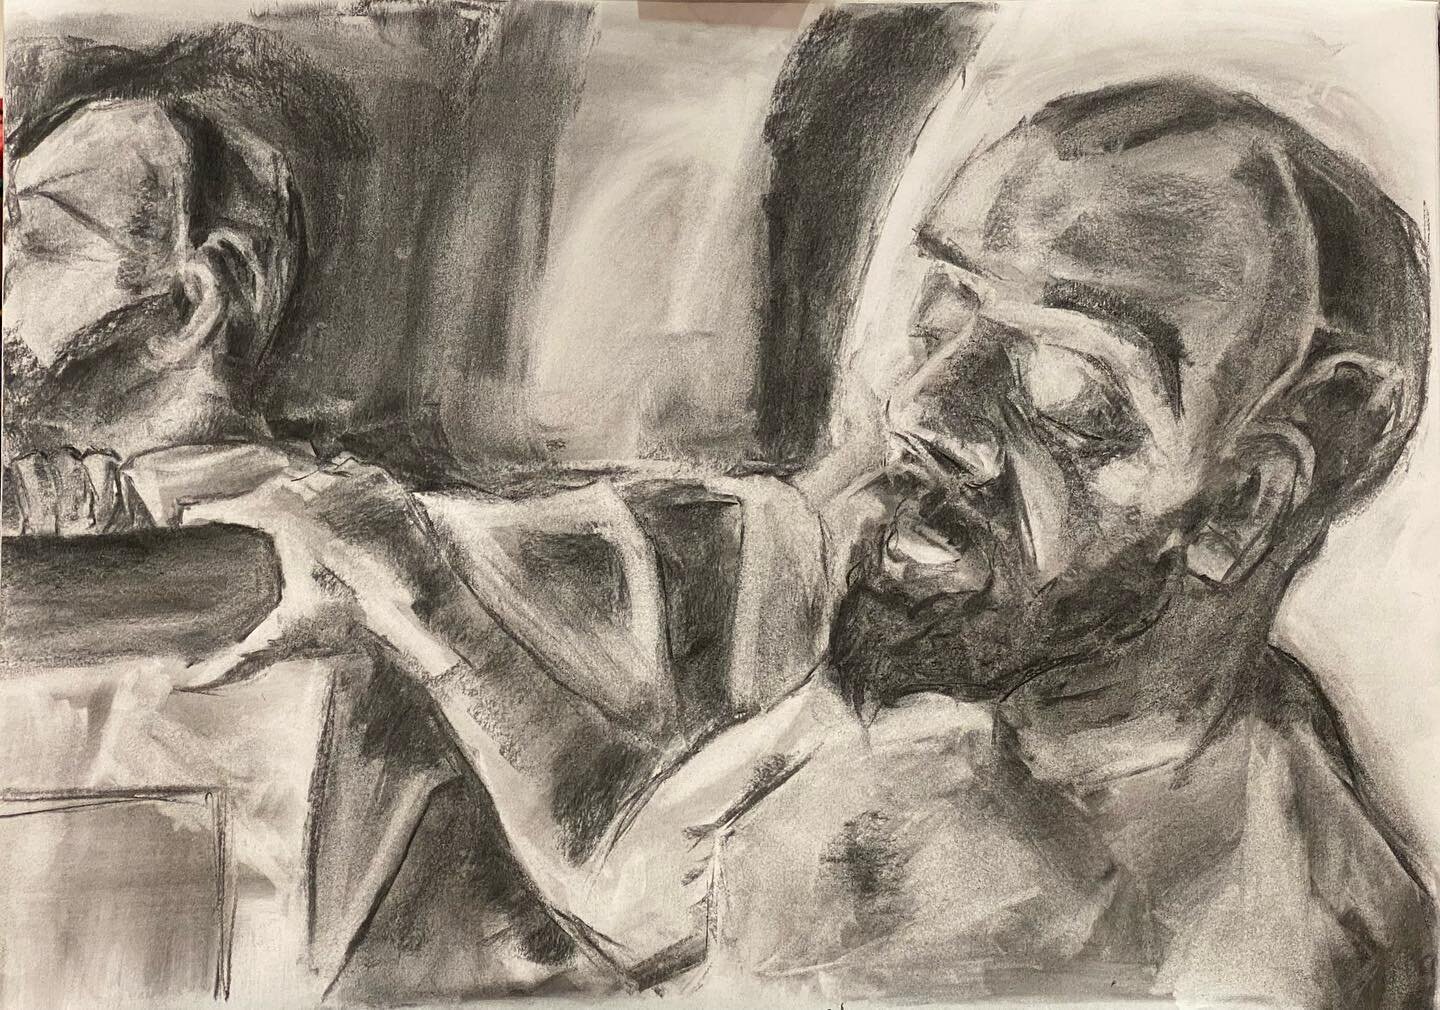 Double Daryls from this evening&rsquo;s class with @johnclosearts and model @daryljhembrough 

Charcoal on A2 paper, each pose c.1 hour

#lifedrawing #figuredrawing #lifemodel #drawingclass #charcoal #workonpaper #portrait #drawing #blackandwhite #re